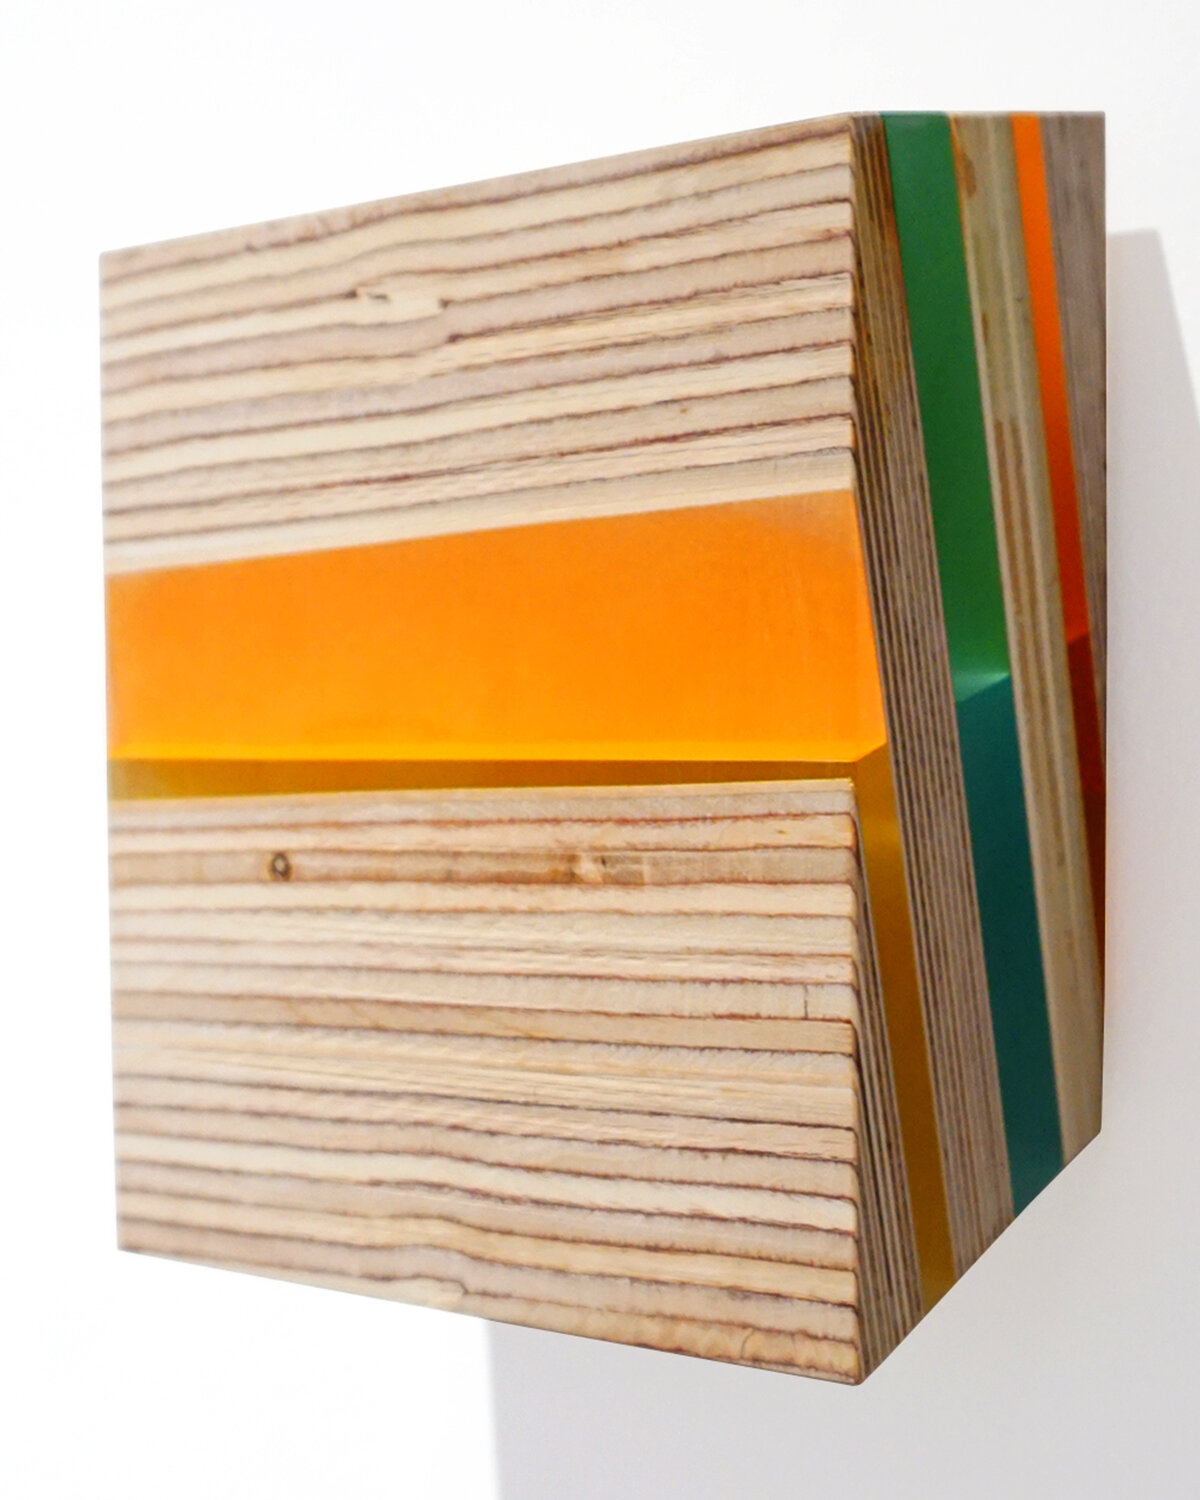 Pyrite Paisley Series: Oblique Orange (side view), 9.5 x 7 x 4 inches / 24.1 x 17.8 x 10.2 cm, mixed media on various plywoods and Lucite, 2019